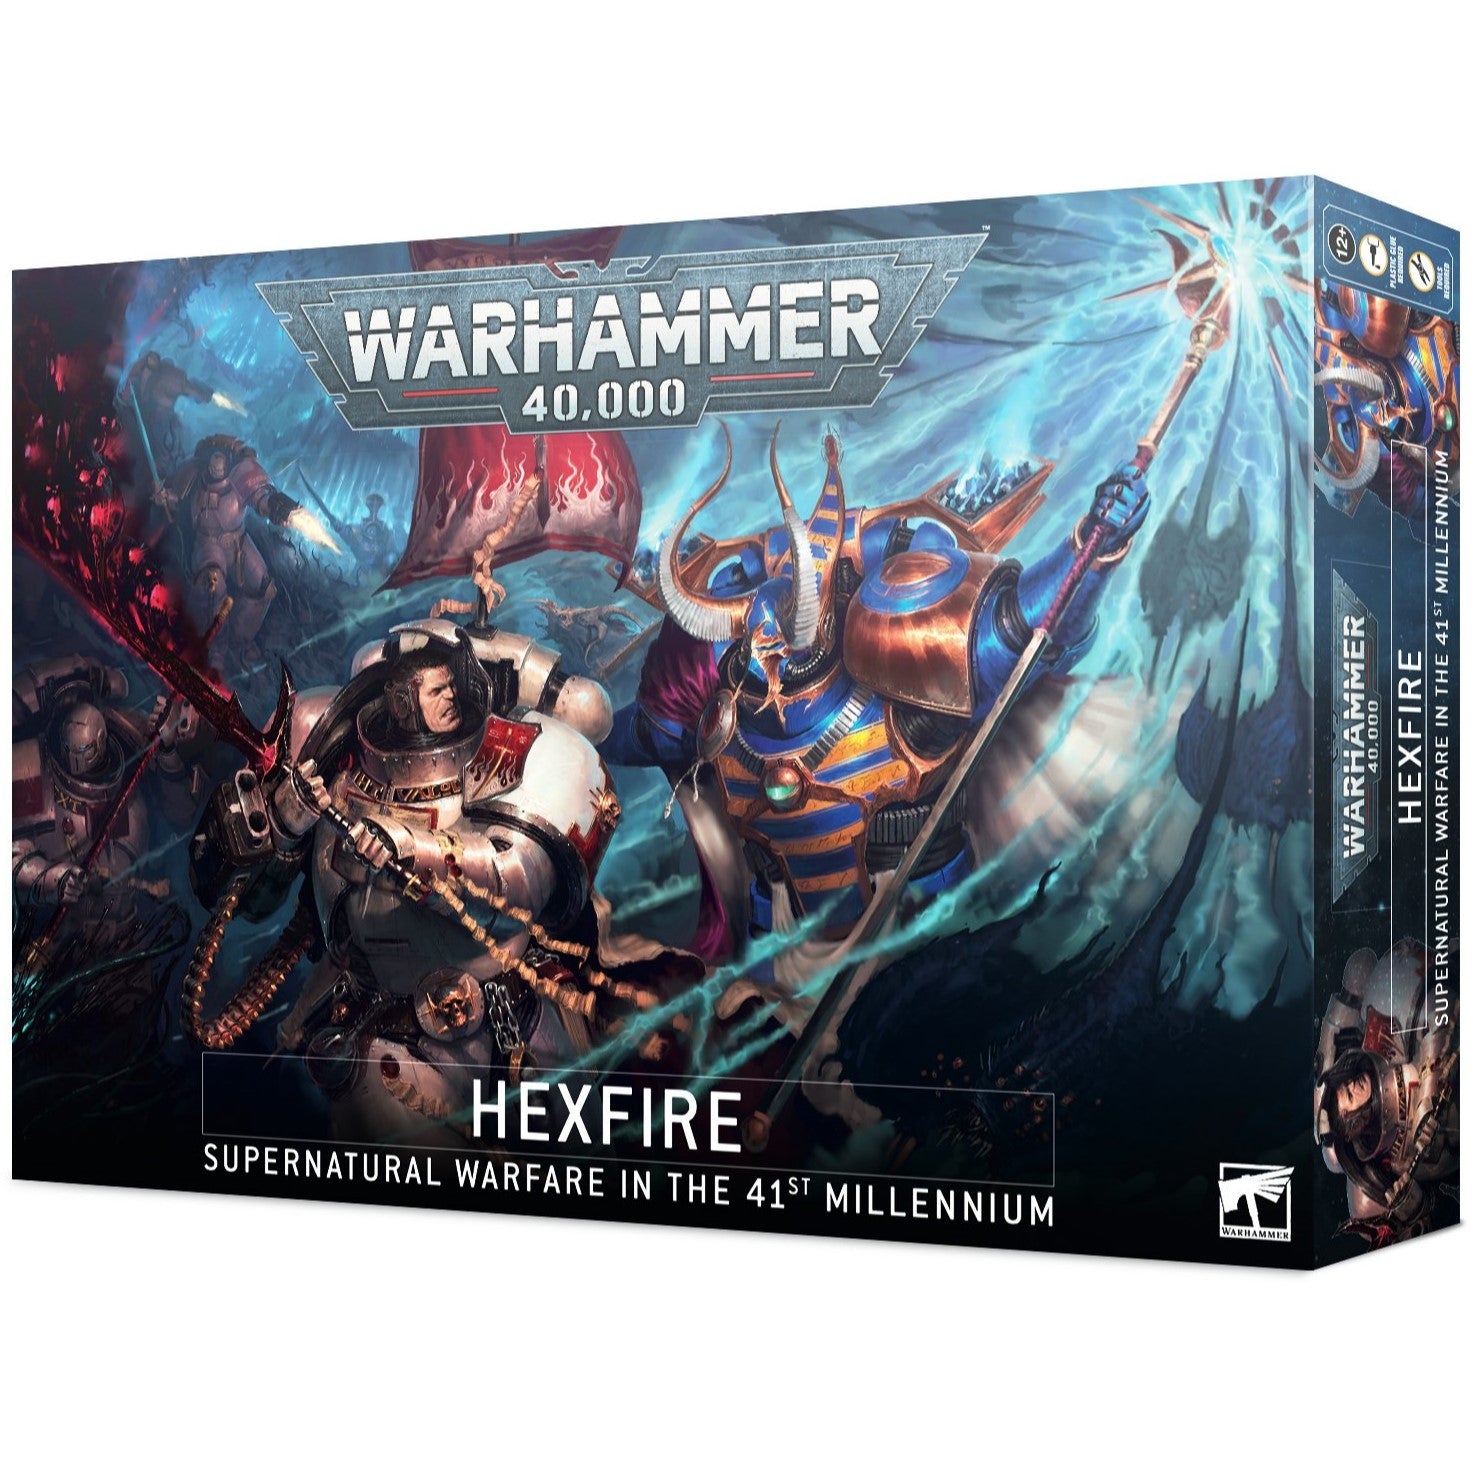 Product Image for Warhammer 40K Hexfire